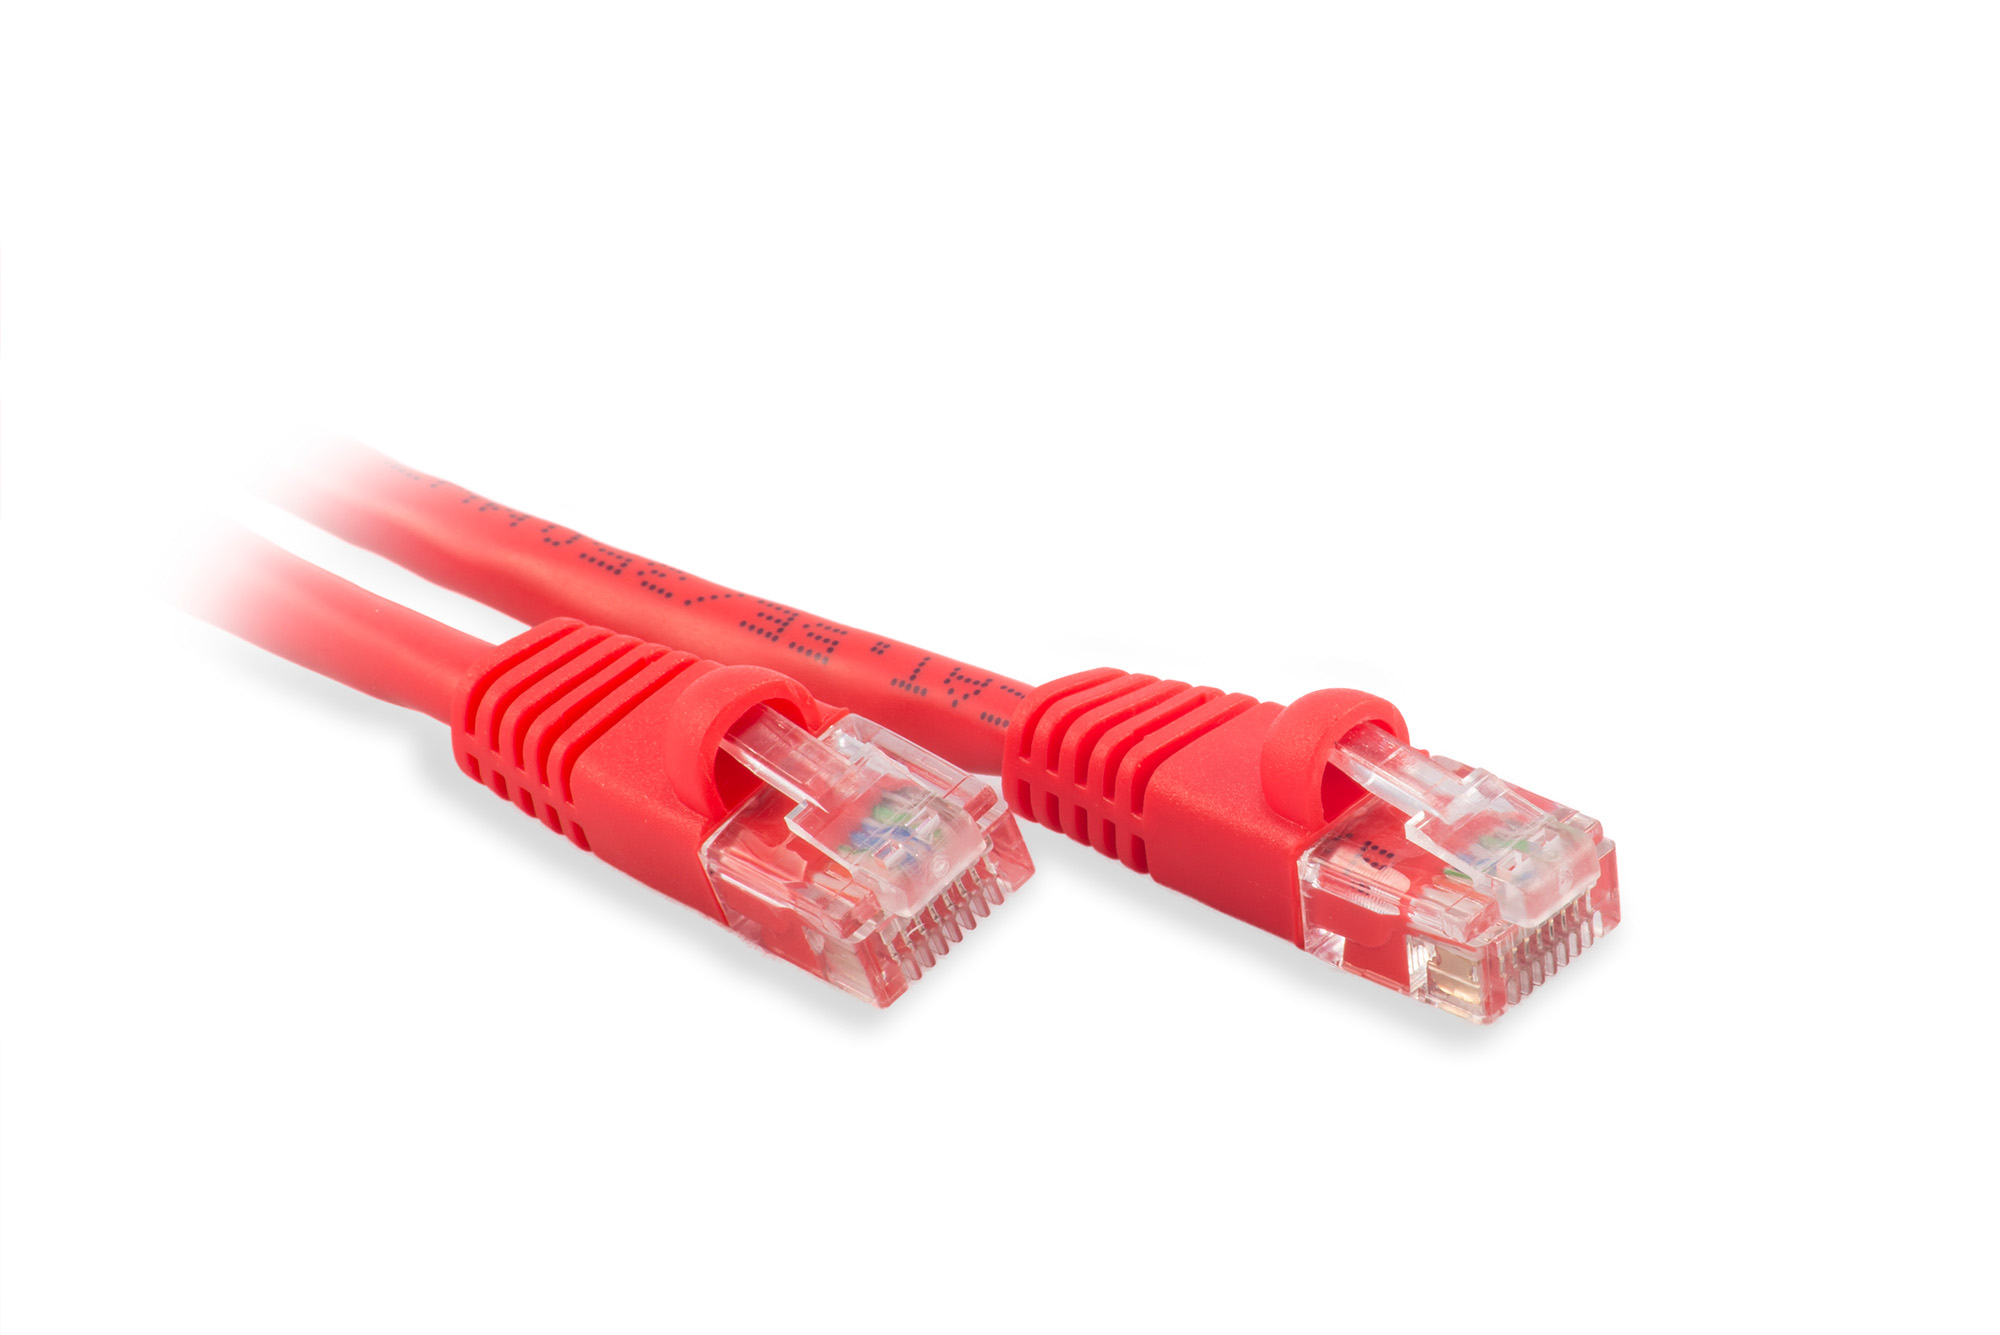 5ft Cat5e Ethernet Patch Cable - Red Color - Snagless Boot, Stranded, RJ45, 350Mhz, 24AWG